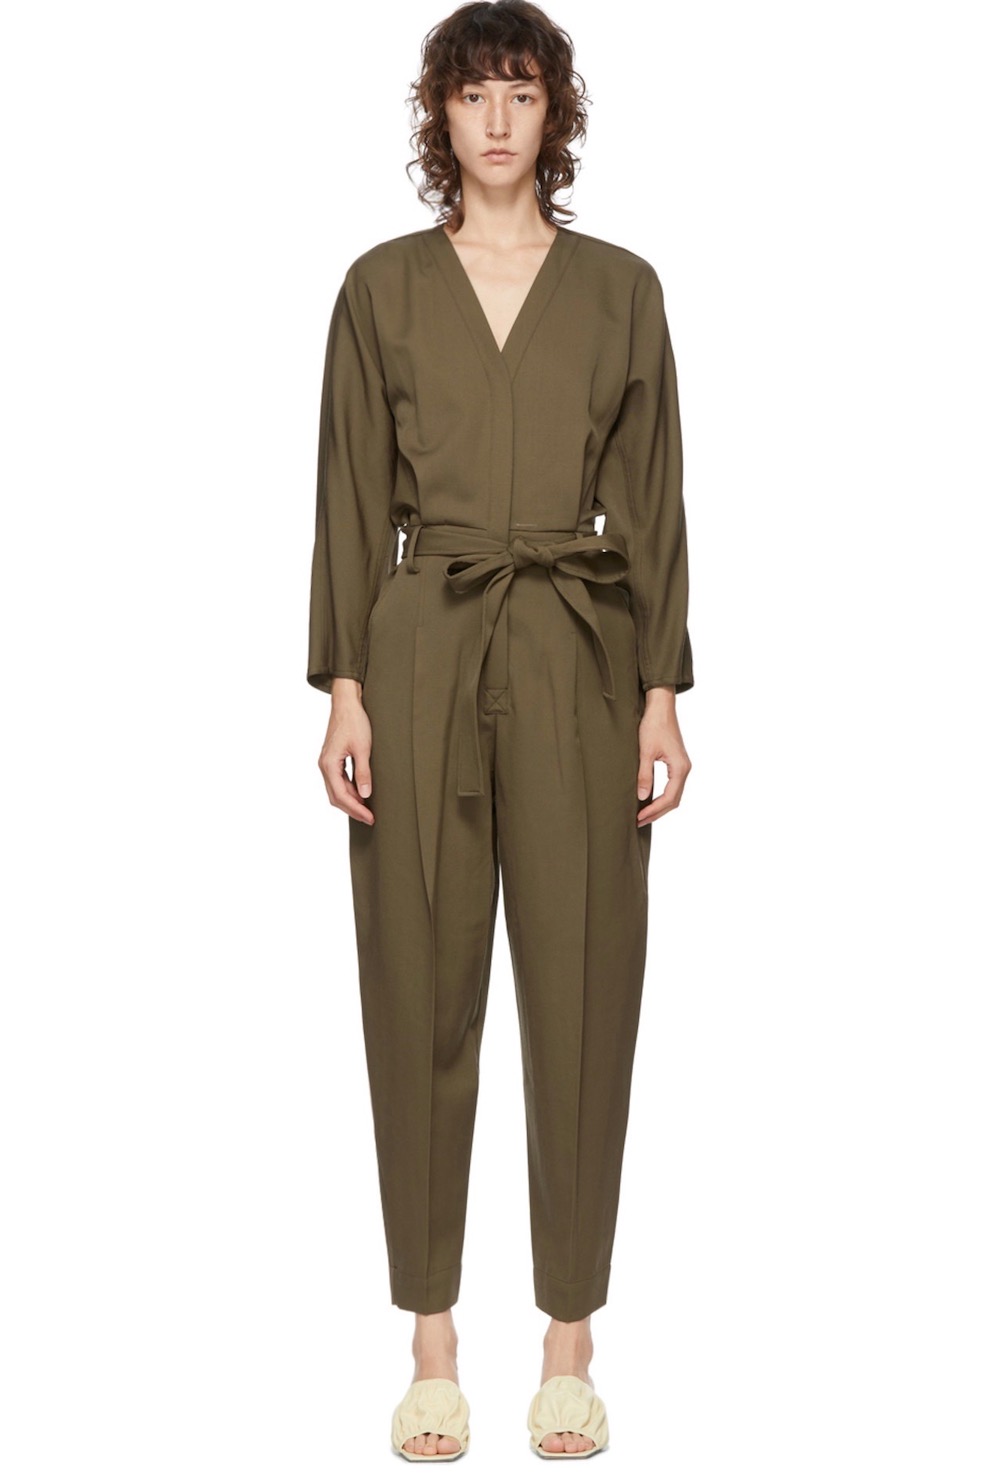 Winter Jumpsuits to Wear All Season Long - theFashionSpot